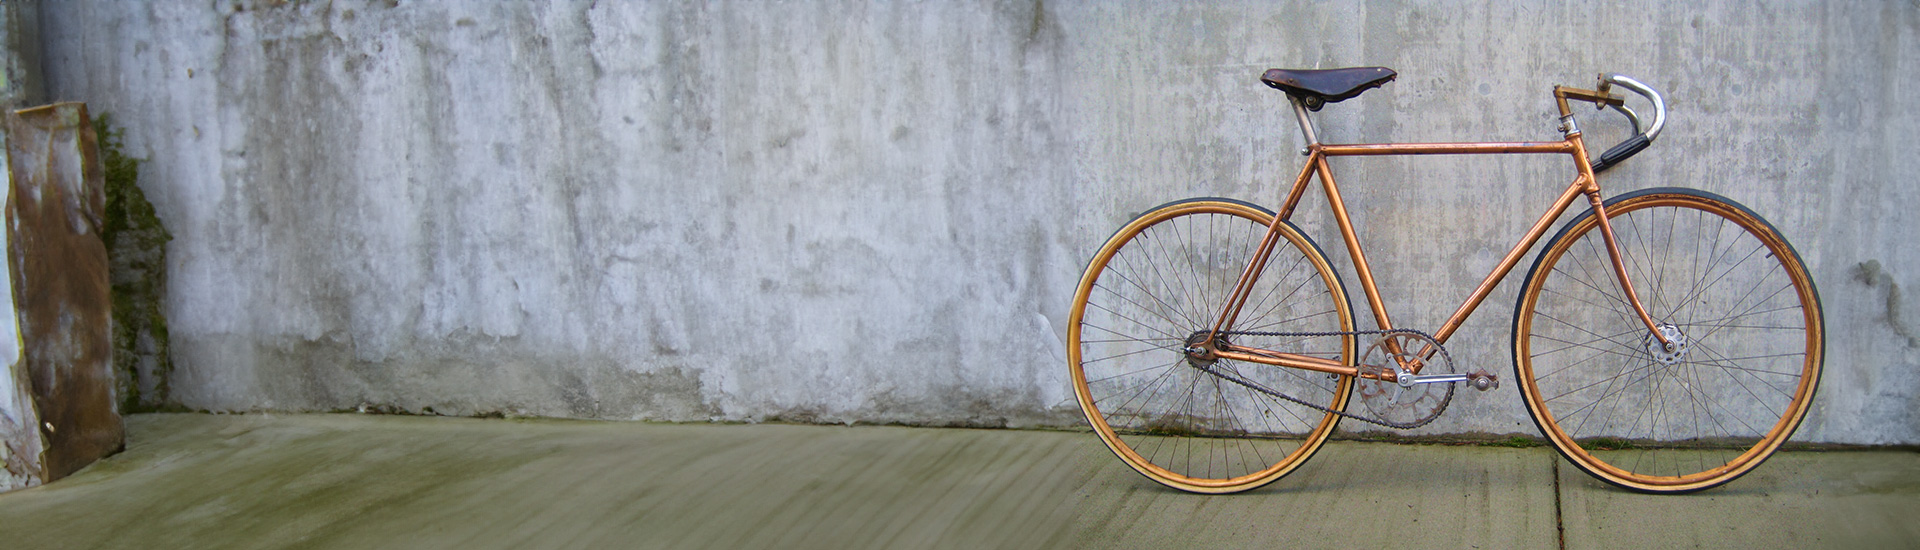 Copper Bicycle Wraps